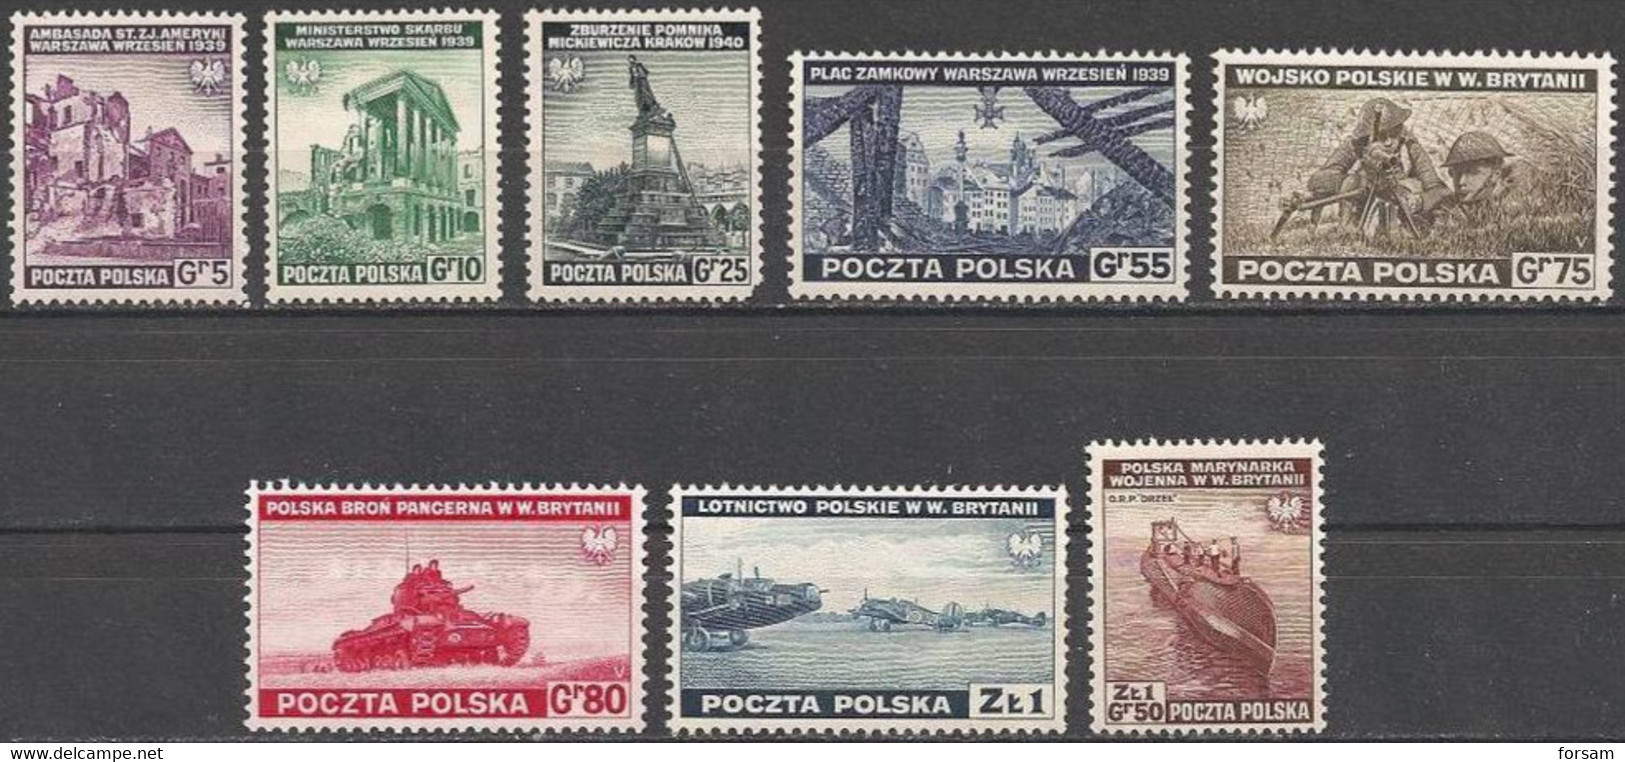 POLAND..1941..Michel # 360-367...MLH...MiCV - 45 Euro. - Government In Exile In London